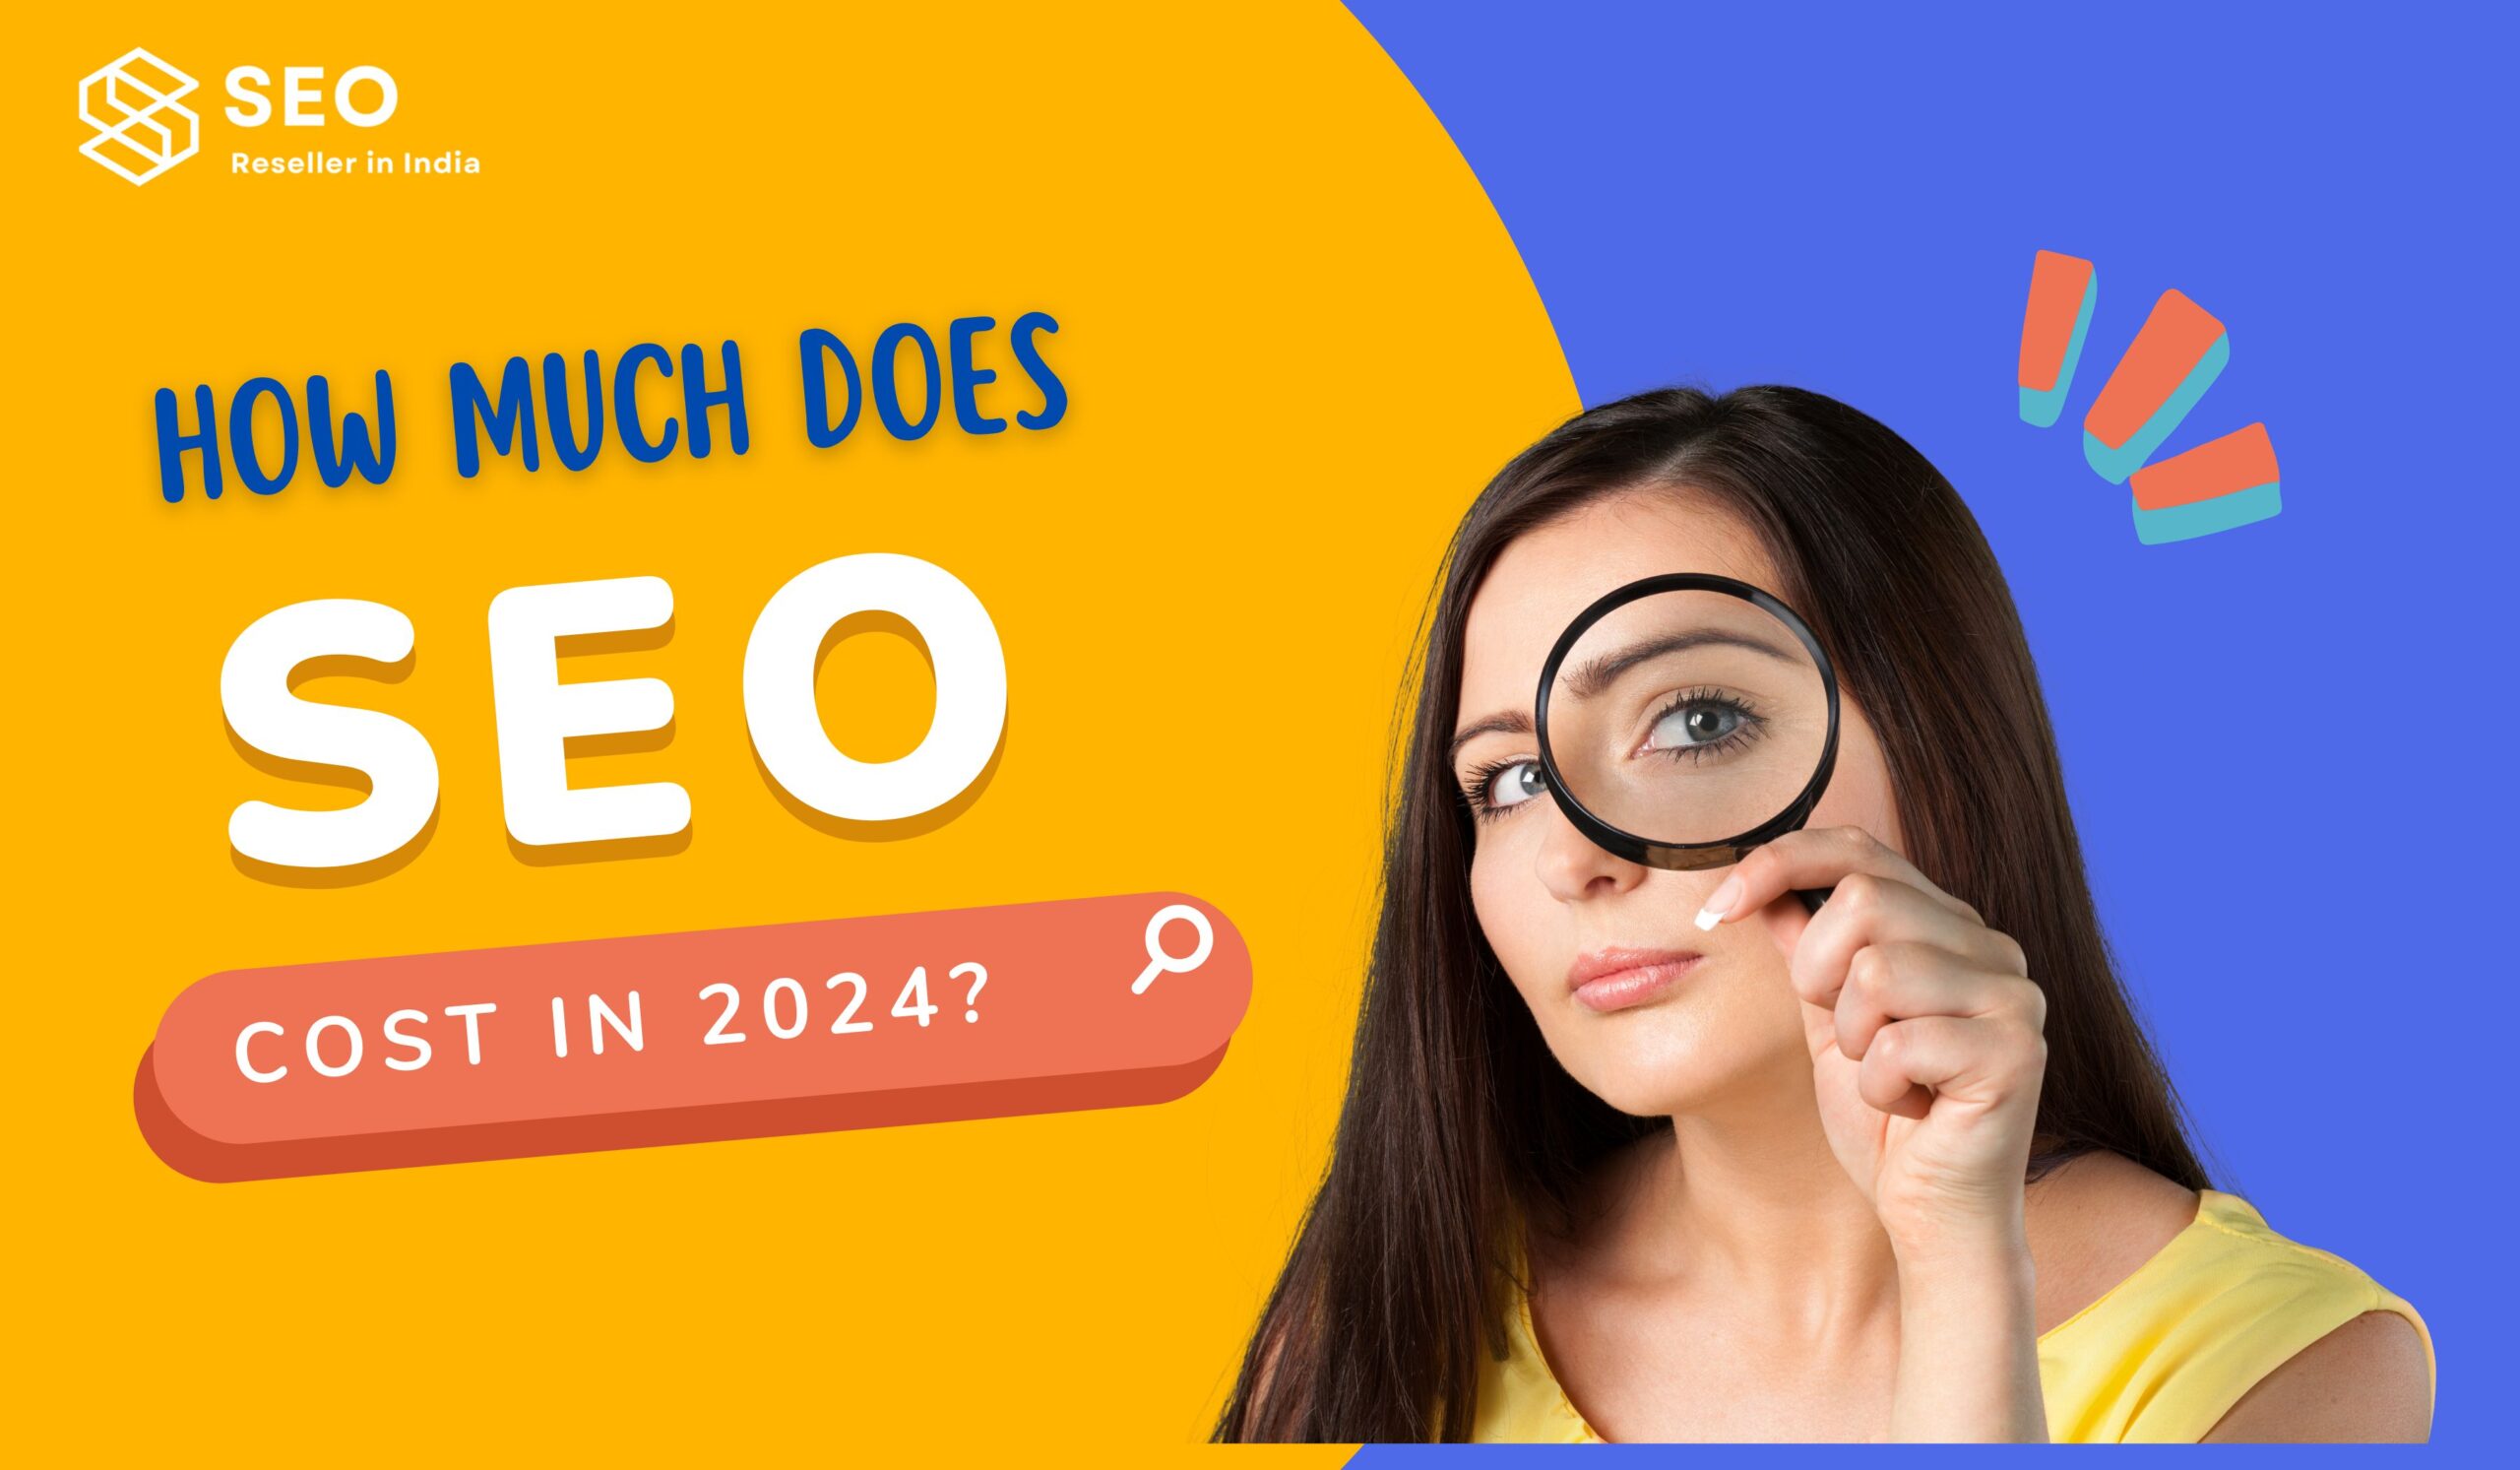 How Much Does SEO Cost in 2024?